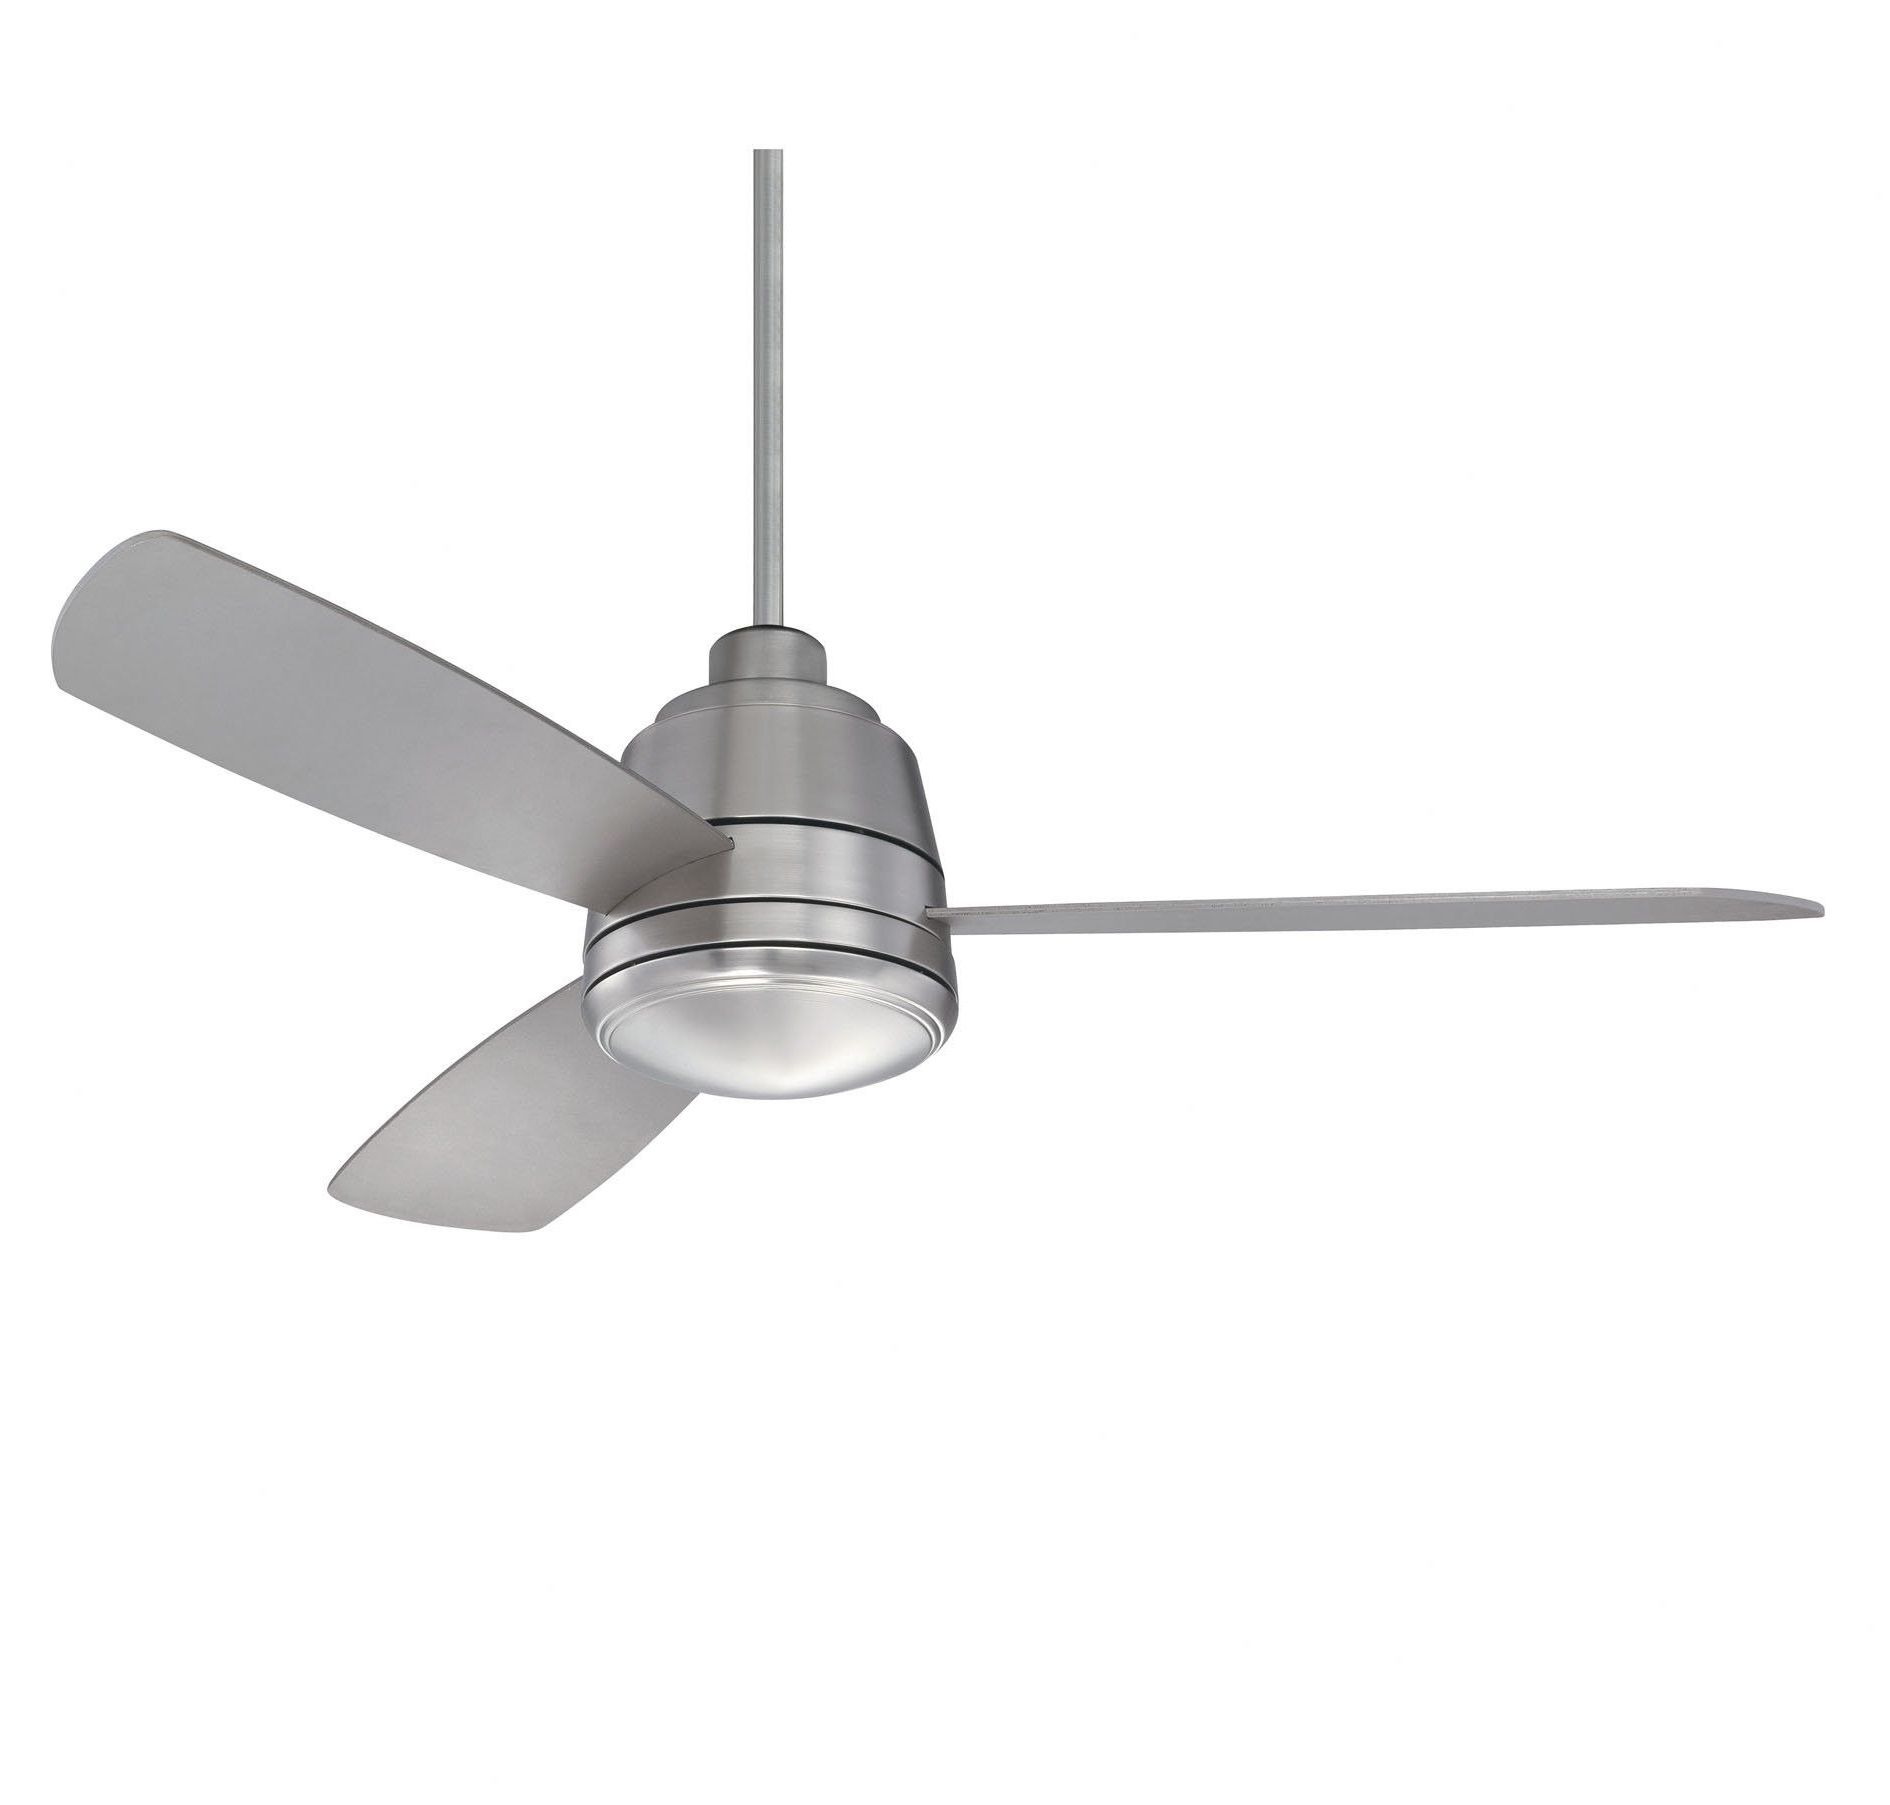 Theron Catoe 3 Blade Ceiling Fans Inside Most Recent 52" Melanthios 3 Blade Ceiling Fan With Remote, Light Kit (View 14 of 20)